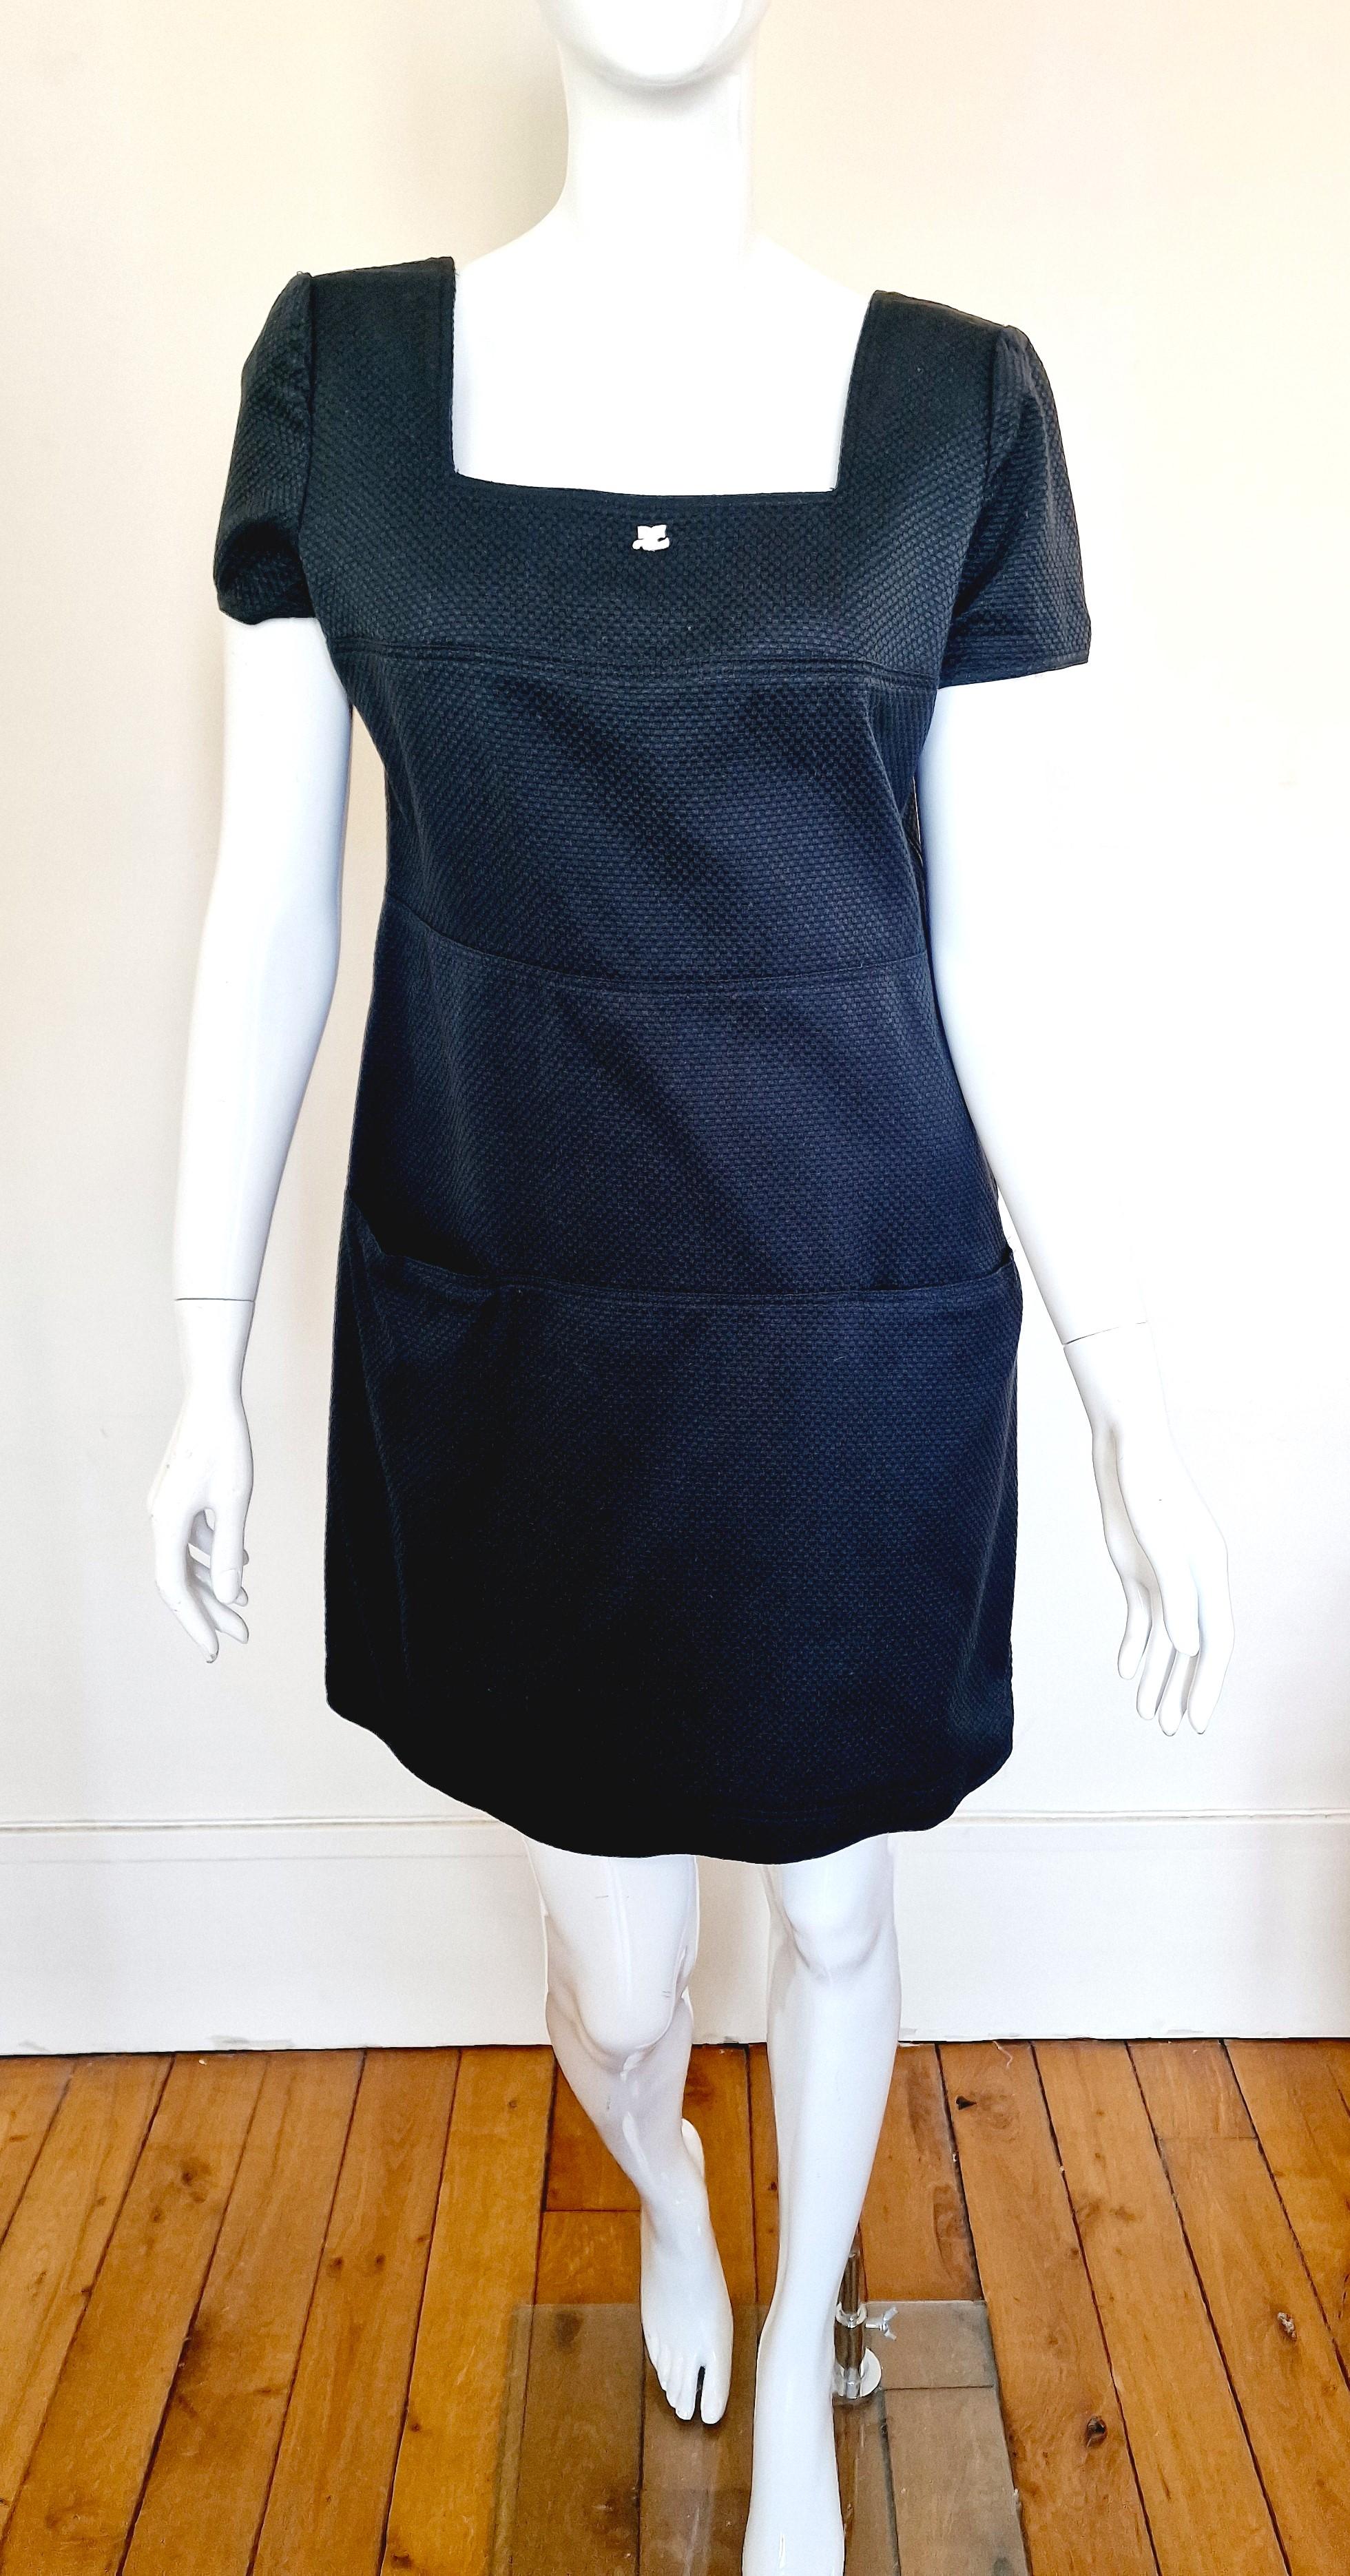 Trapeze dress by André Courrèges!
White logo on the front.
Square neck. Iconic Courrèges look!
2 huge front pockets.
There is a matching jakcet, the jacket is sold separatly!

VERY GOOD condition!

SIZE
Large.
Marked size: FR40.
Length: 88 cm / 34.6